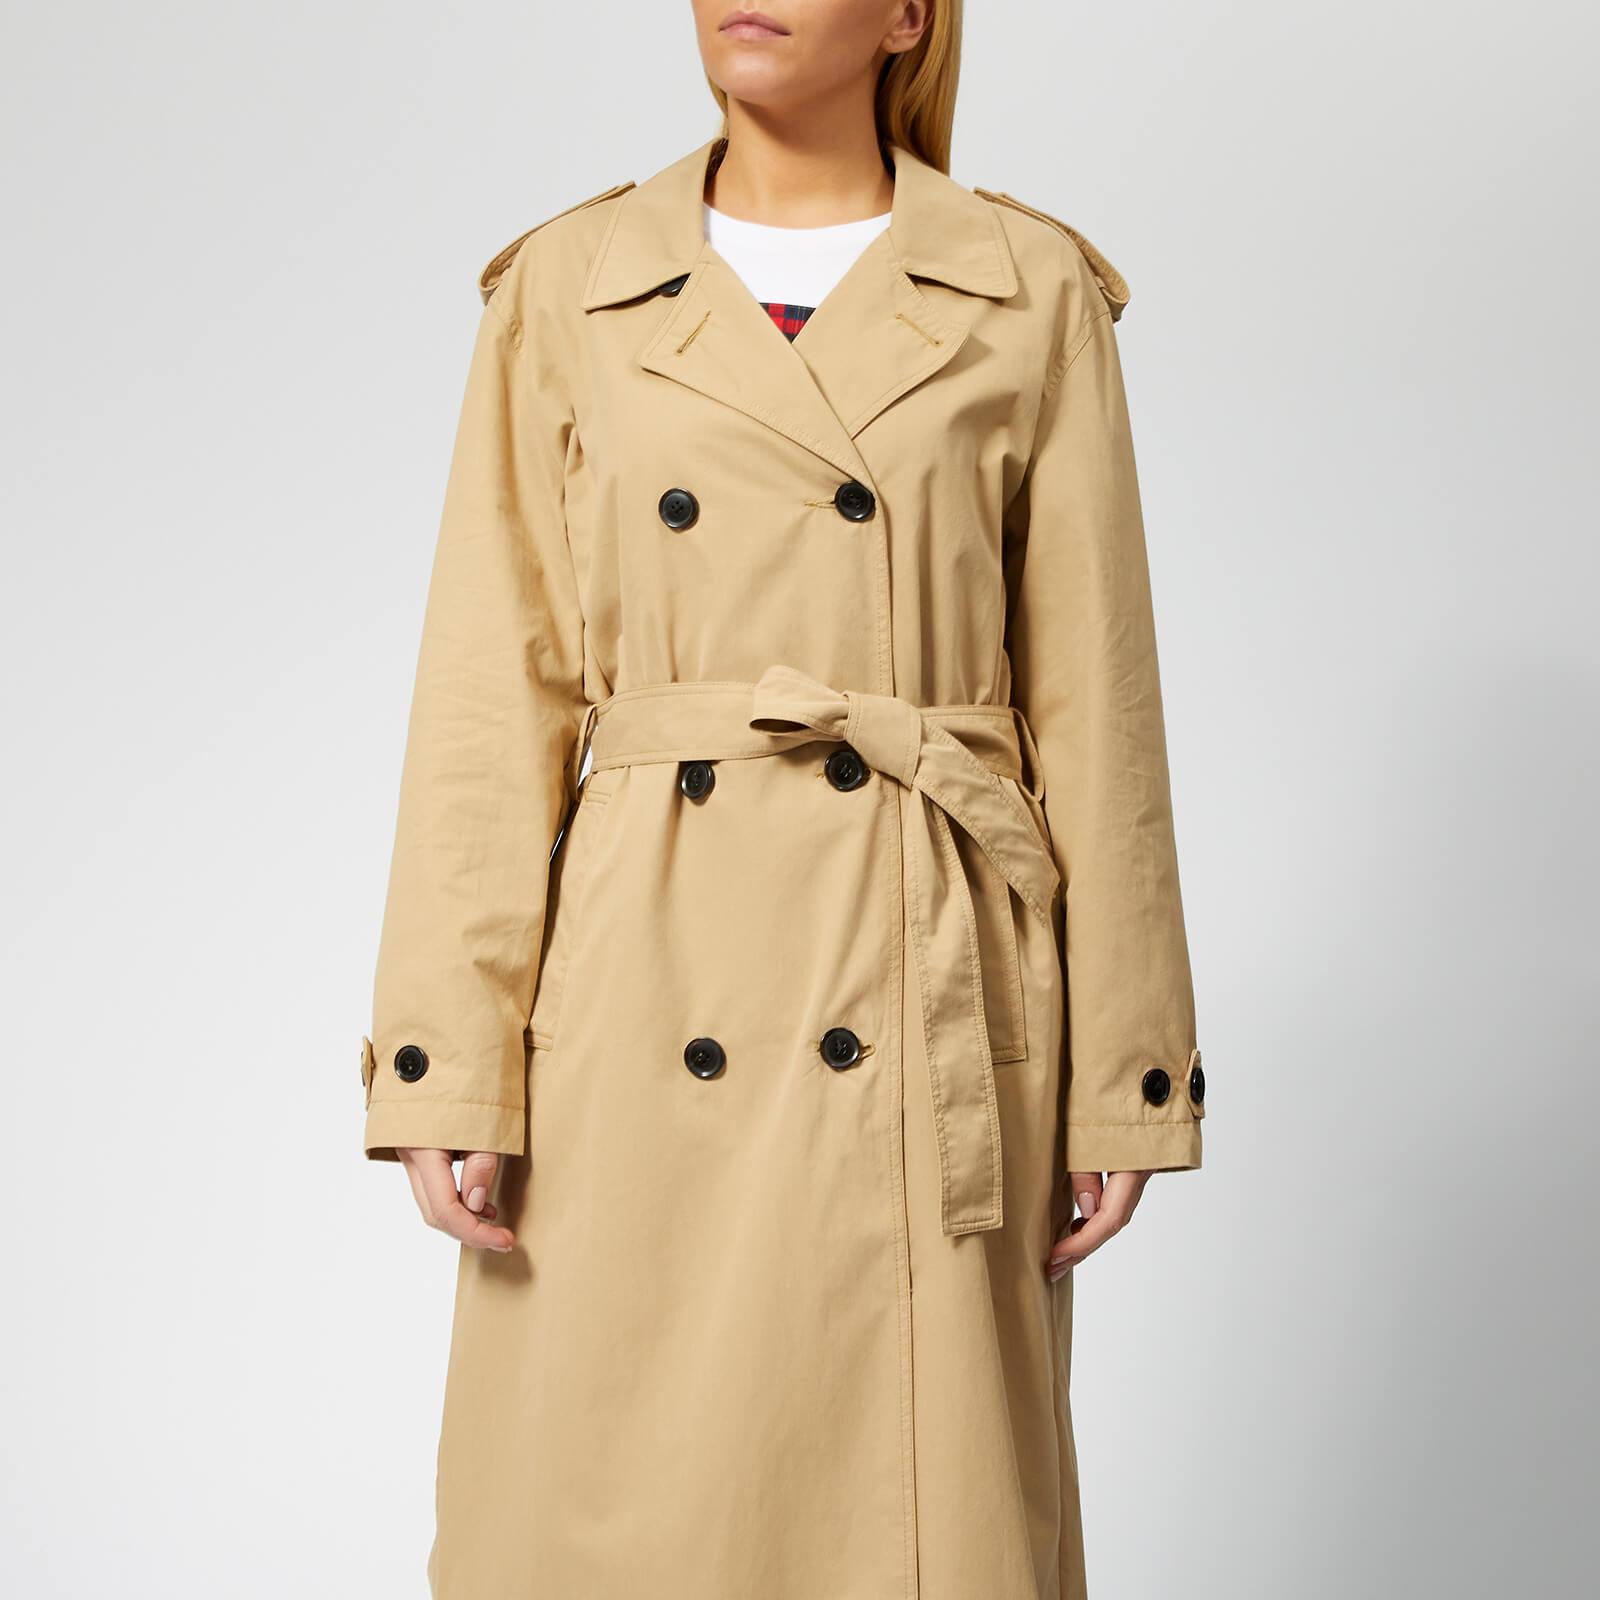 Levi's Cotton Kate Trench Coat in Cream (Natural) - Lyst